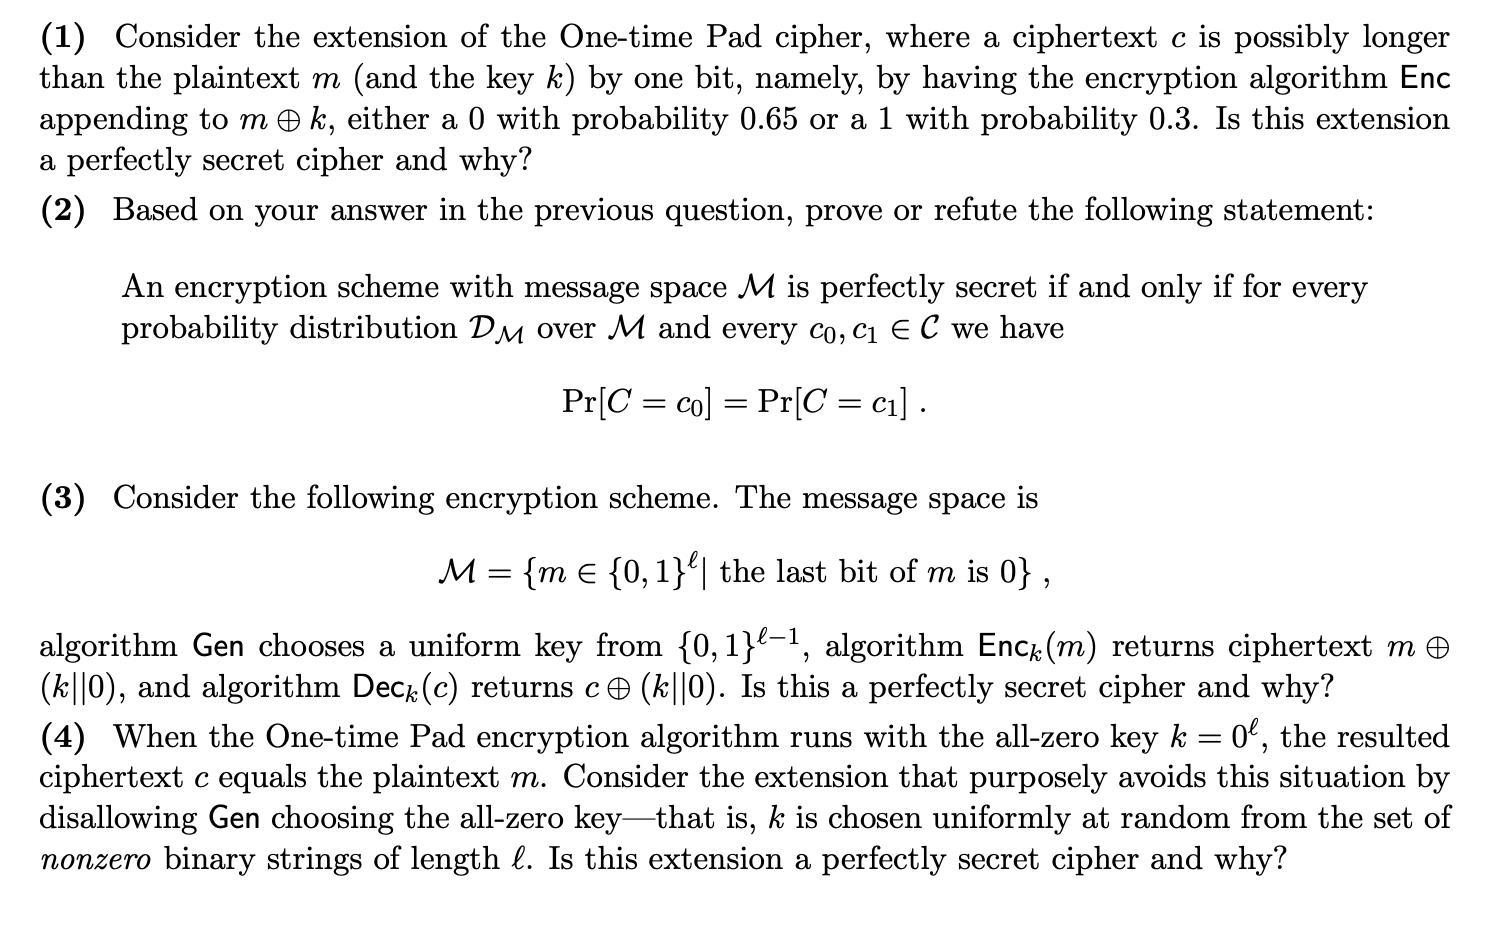 (1) Consider the extension of the One-time Pad cipher, where a ciphertext c is possibly longer than the